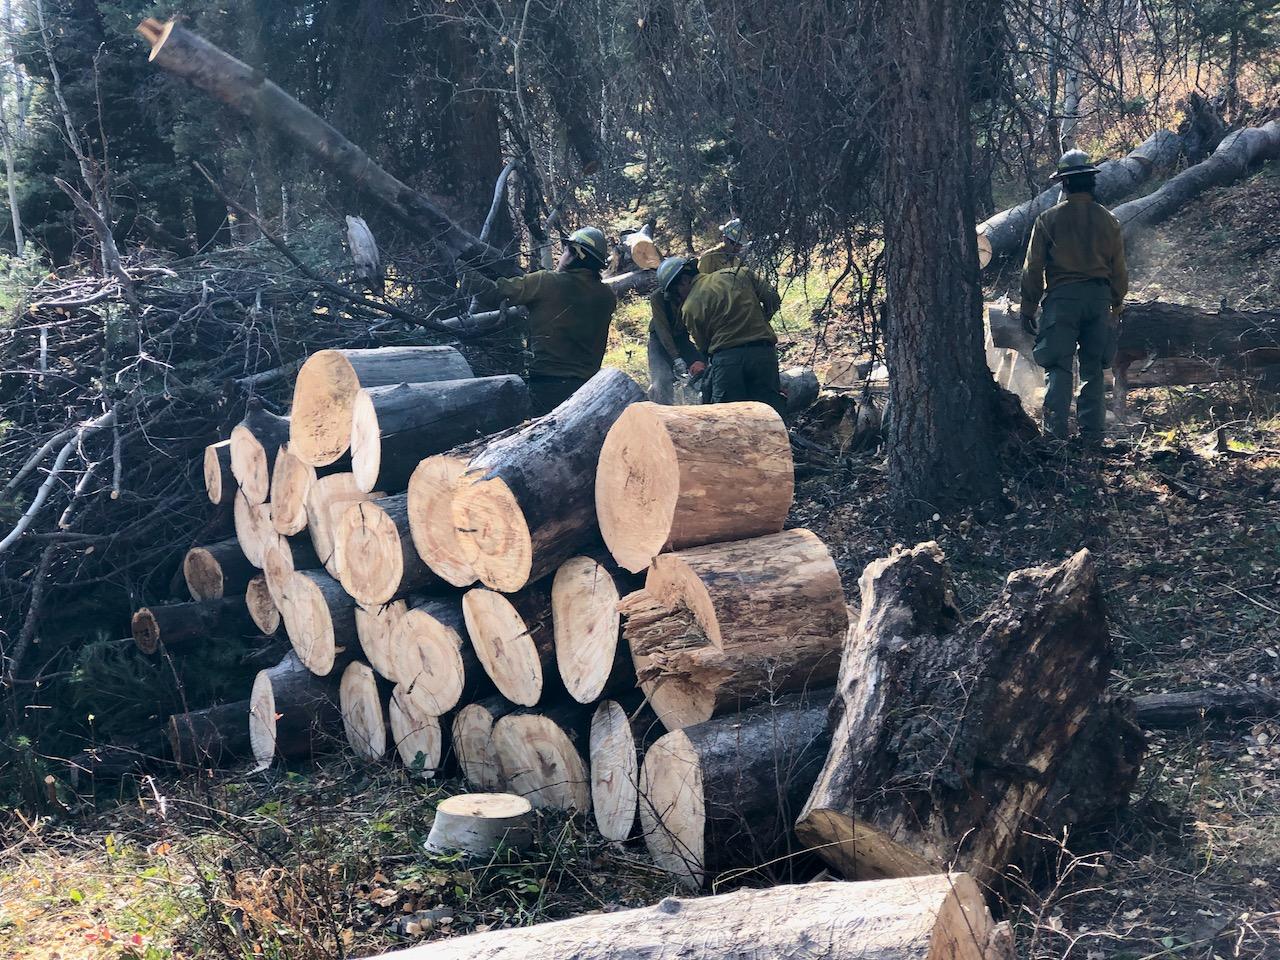 In the foreground is a pile of log rounds beside a pile of brush and tree limbs, with firefighters carrying logs and branches in the background